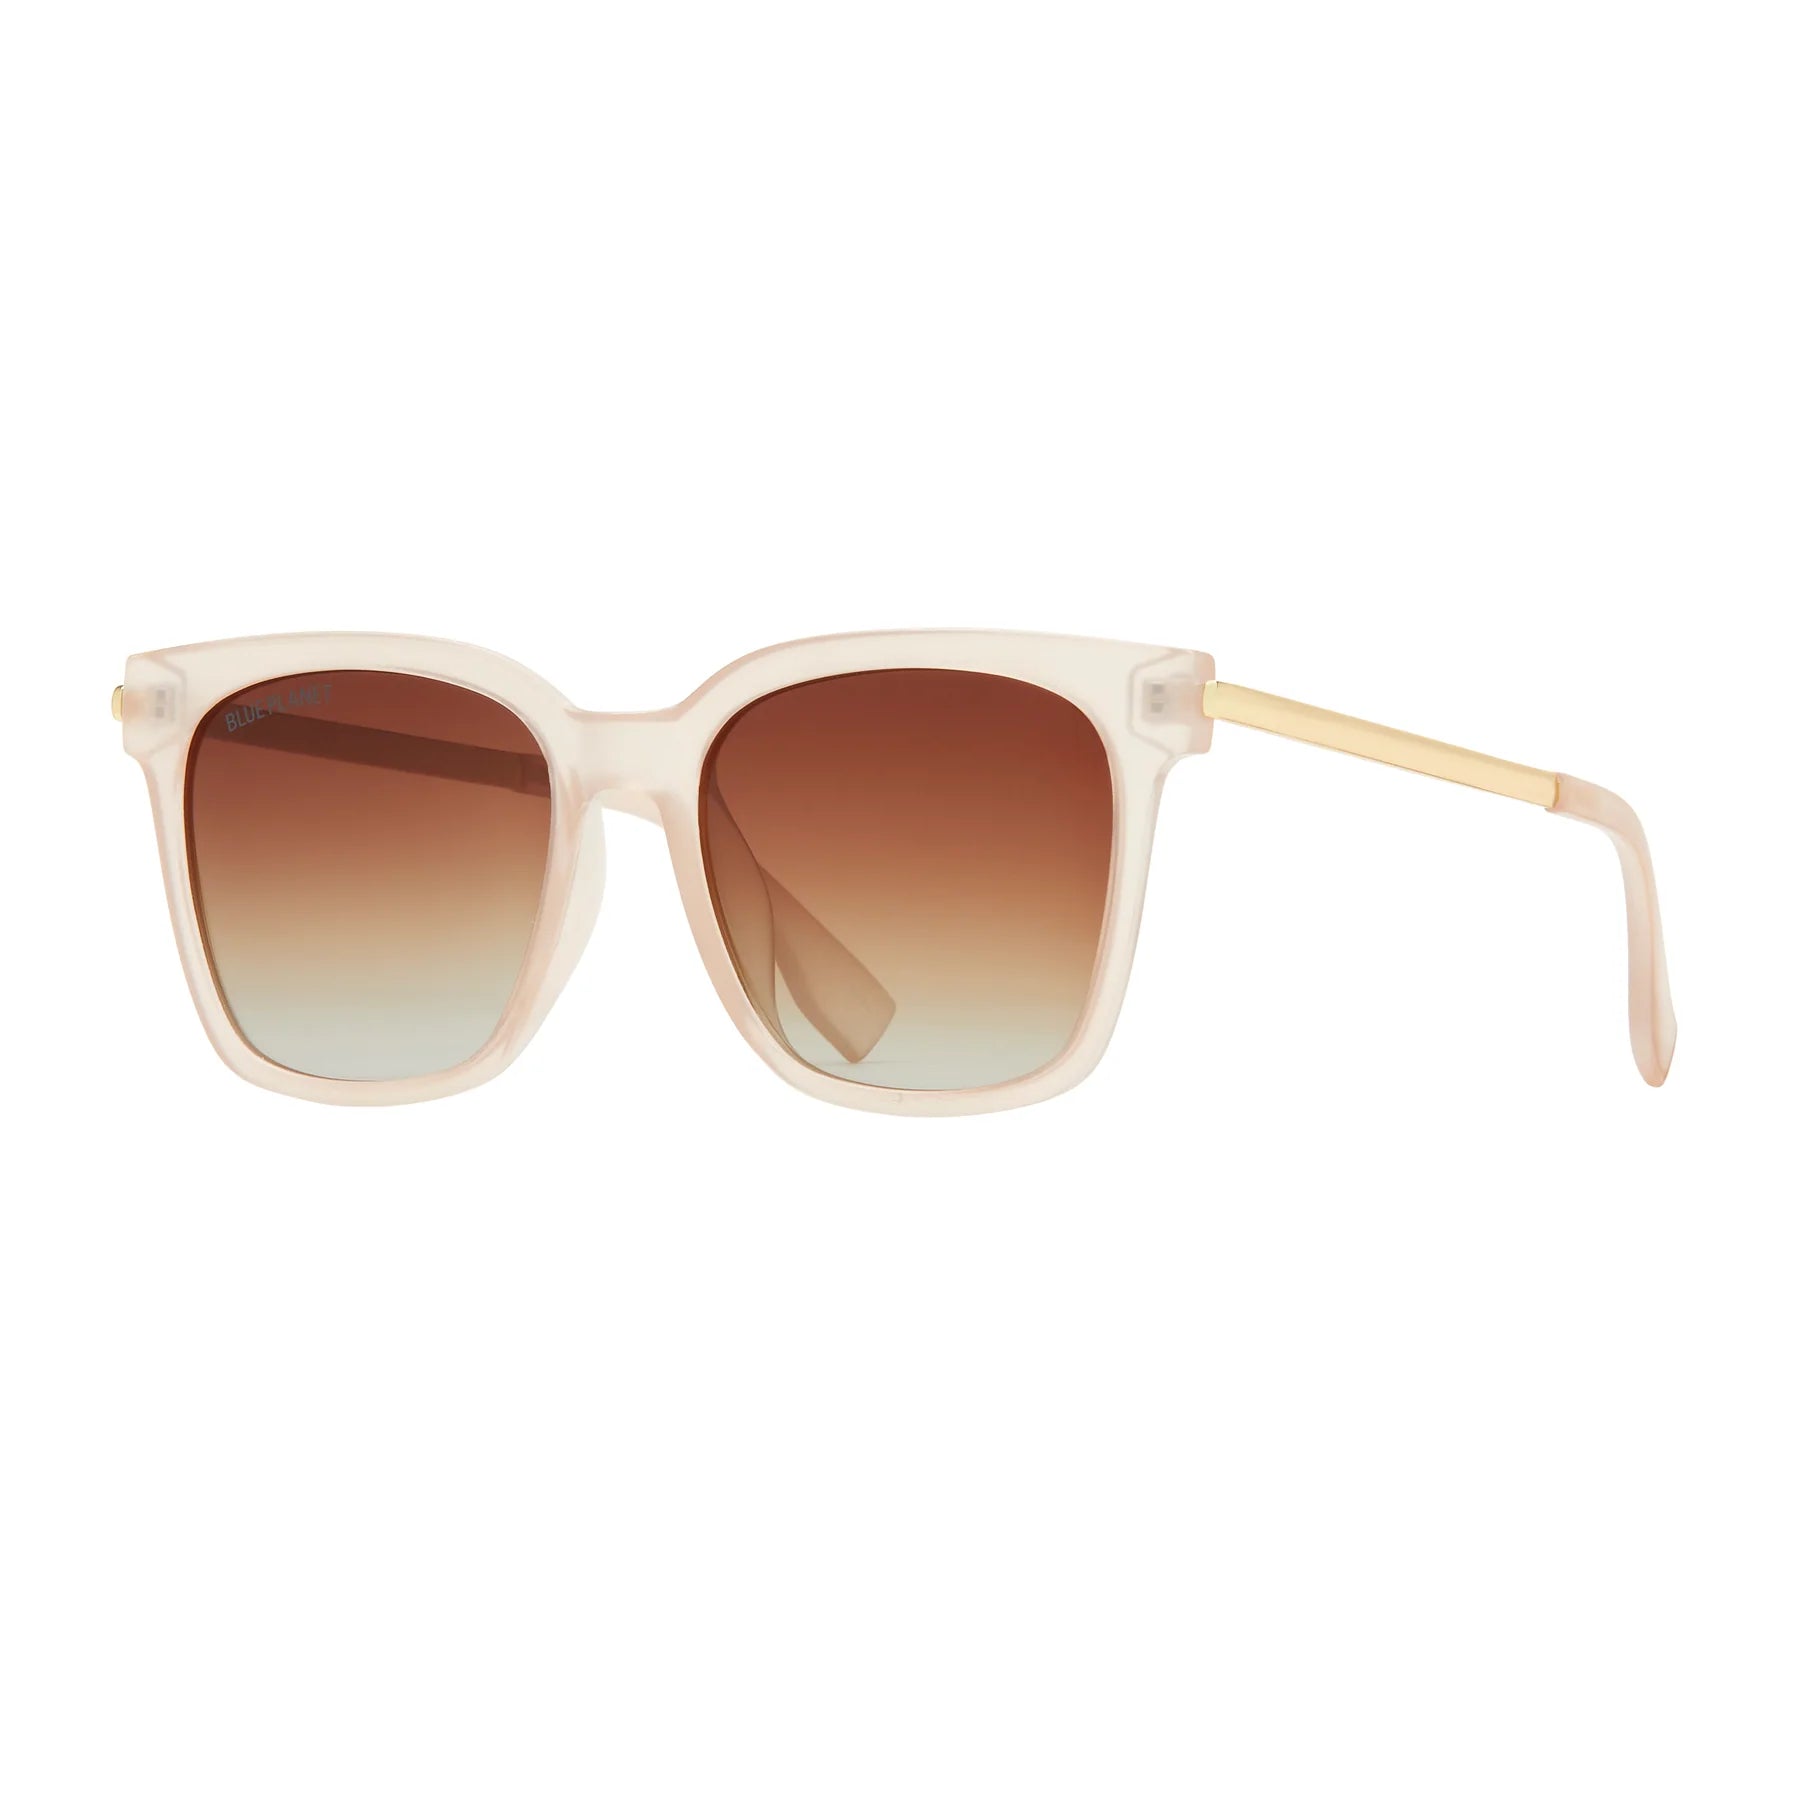 Everly Sunglasses Beige/Gold/Gradient One Size